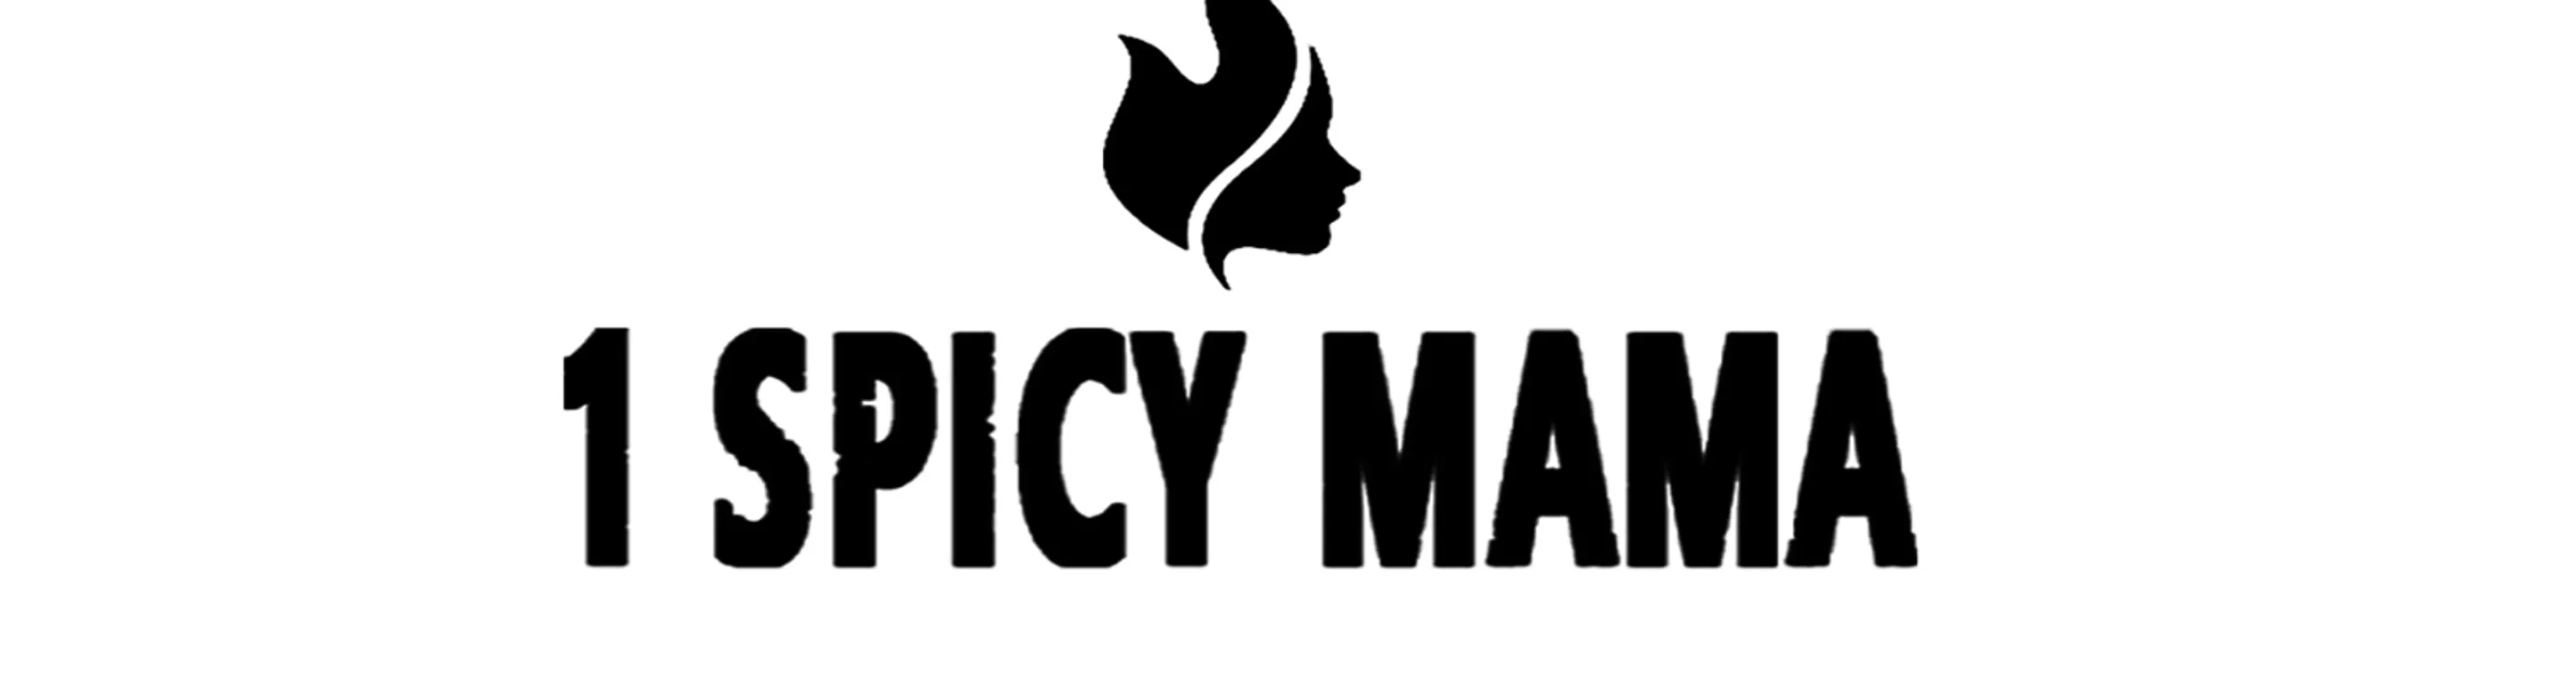 1 spicy mama